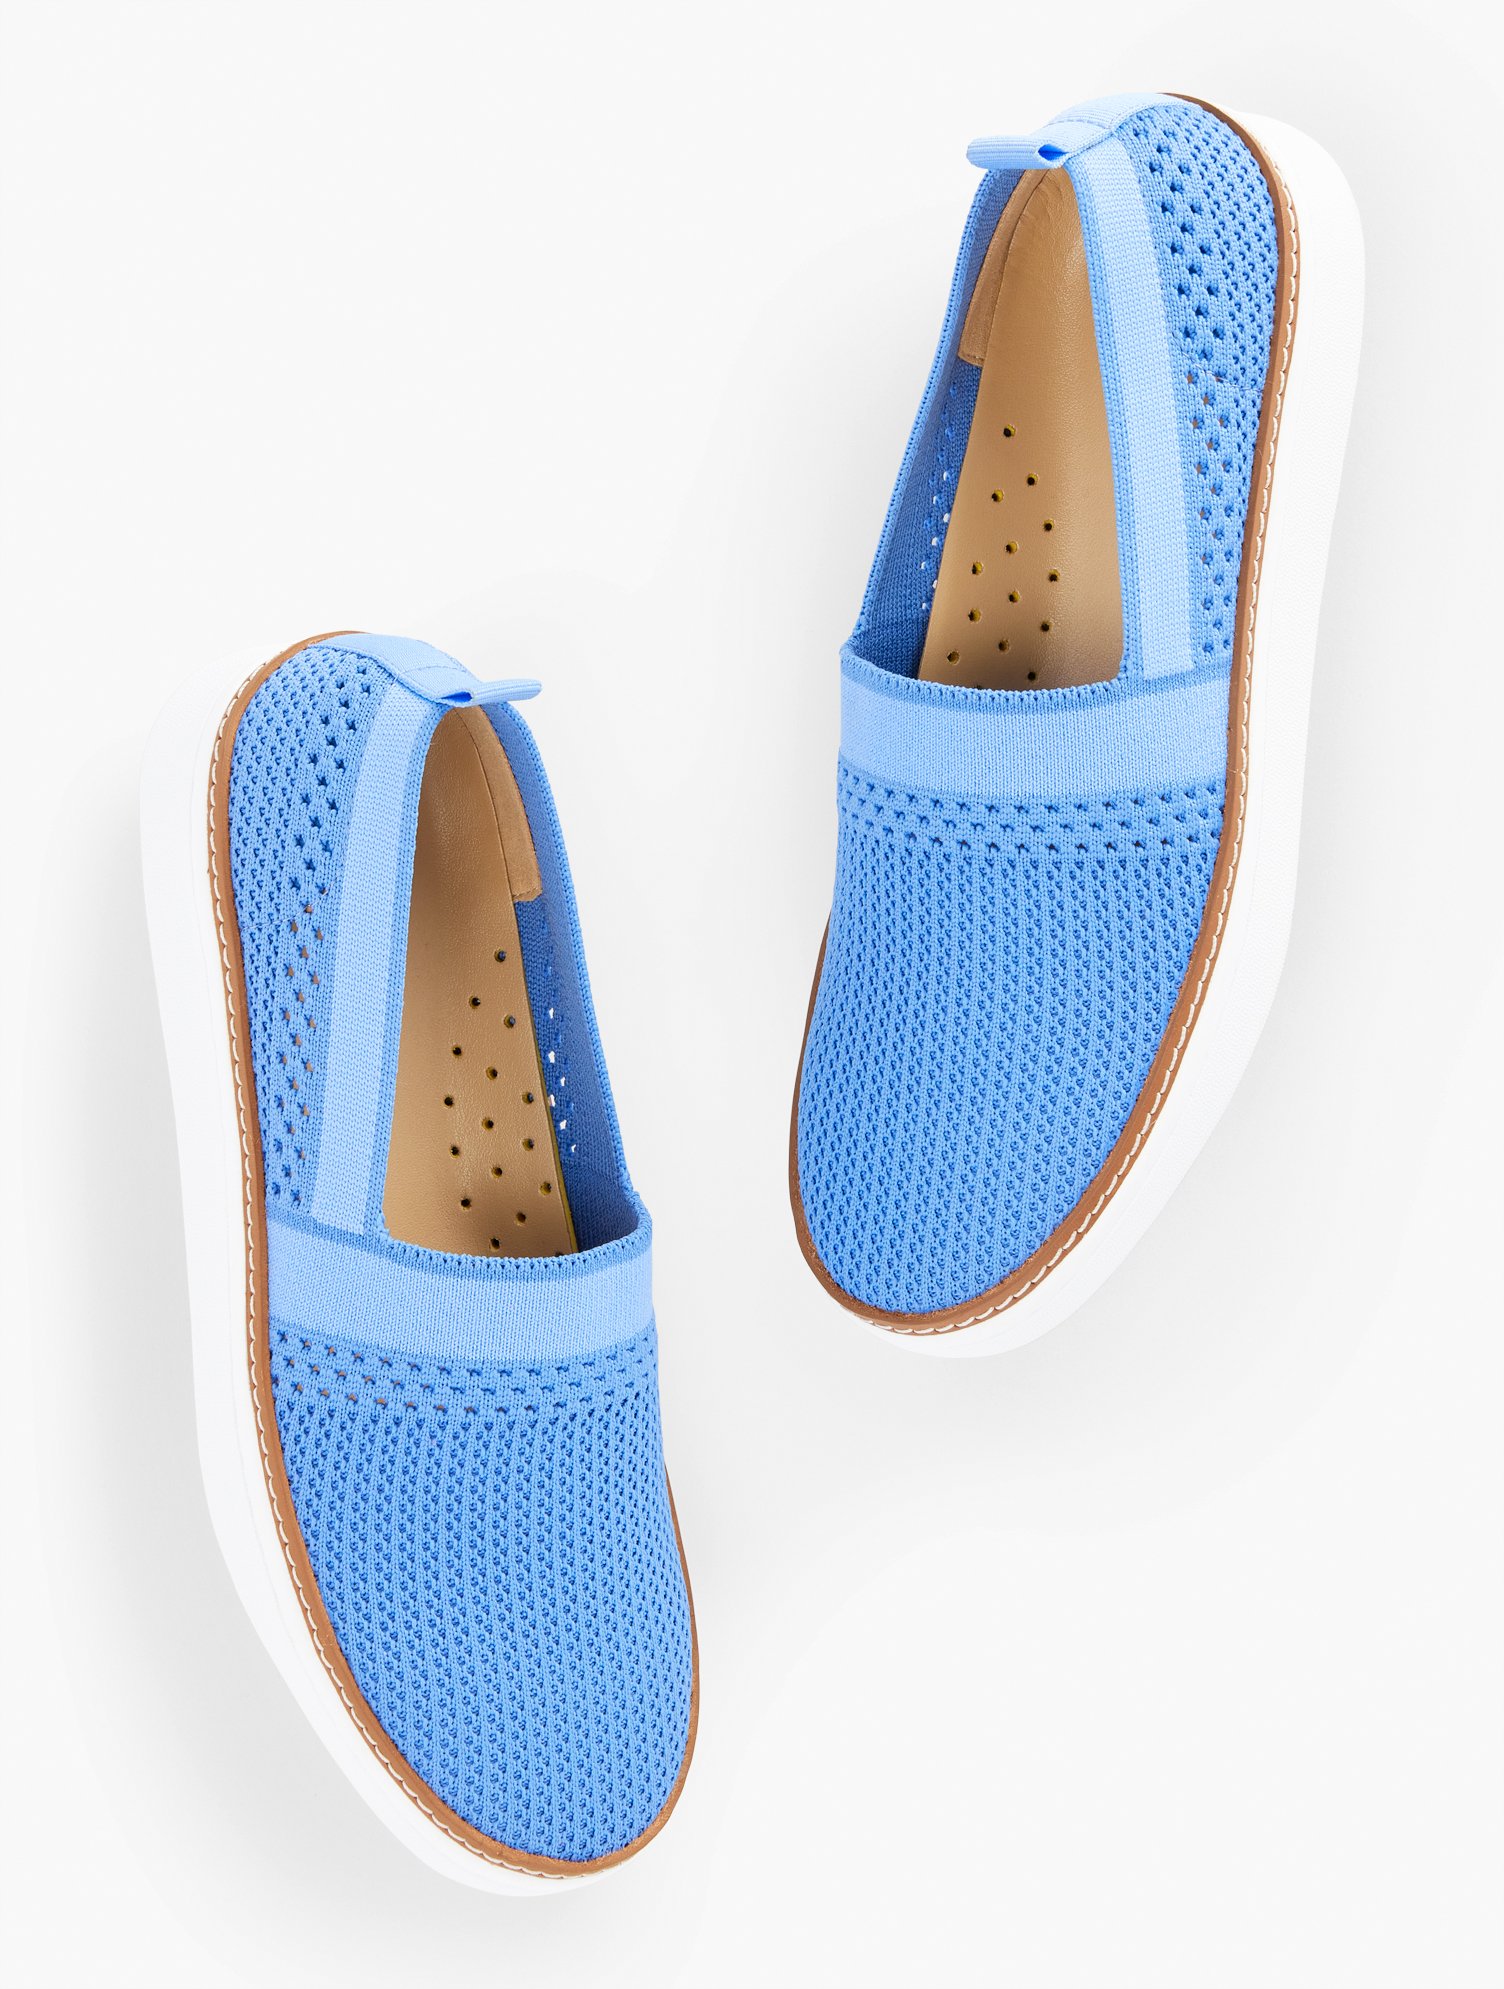 Talbots Brittany Knit Slip-on Sneakers - Blue Iris/blue Sky - 8m - 100% Cotton  In Blue Iris,blue Sky